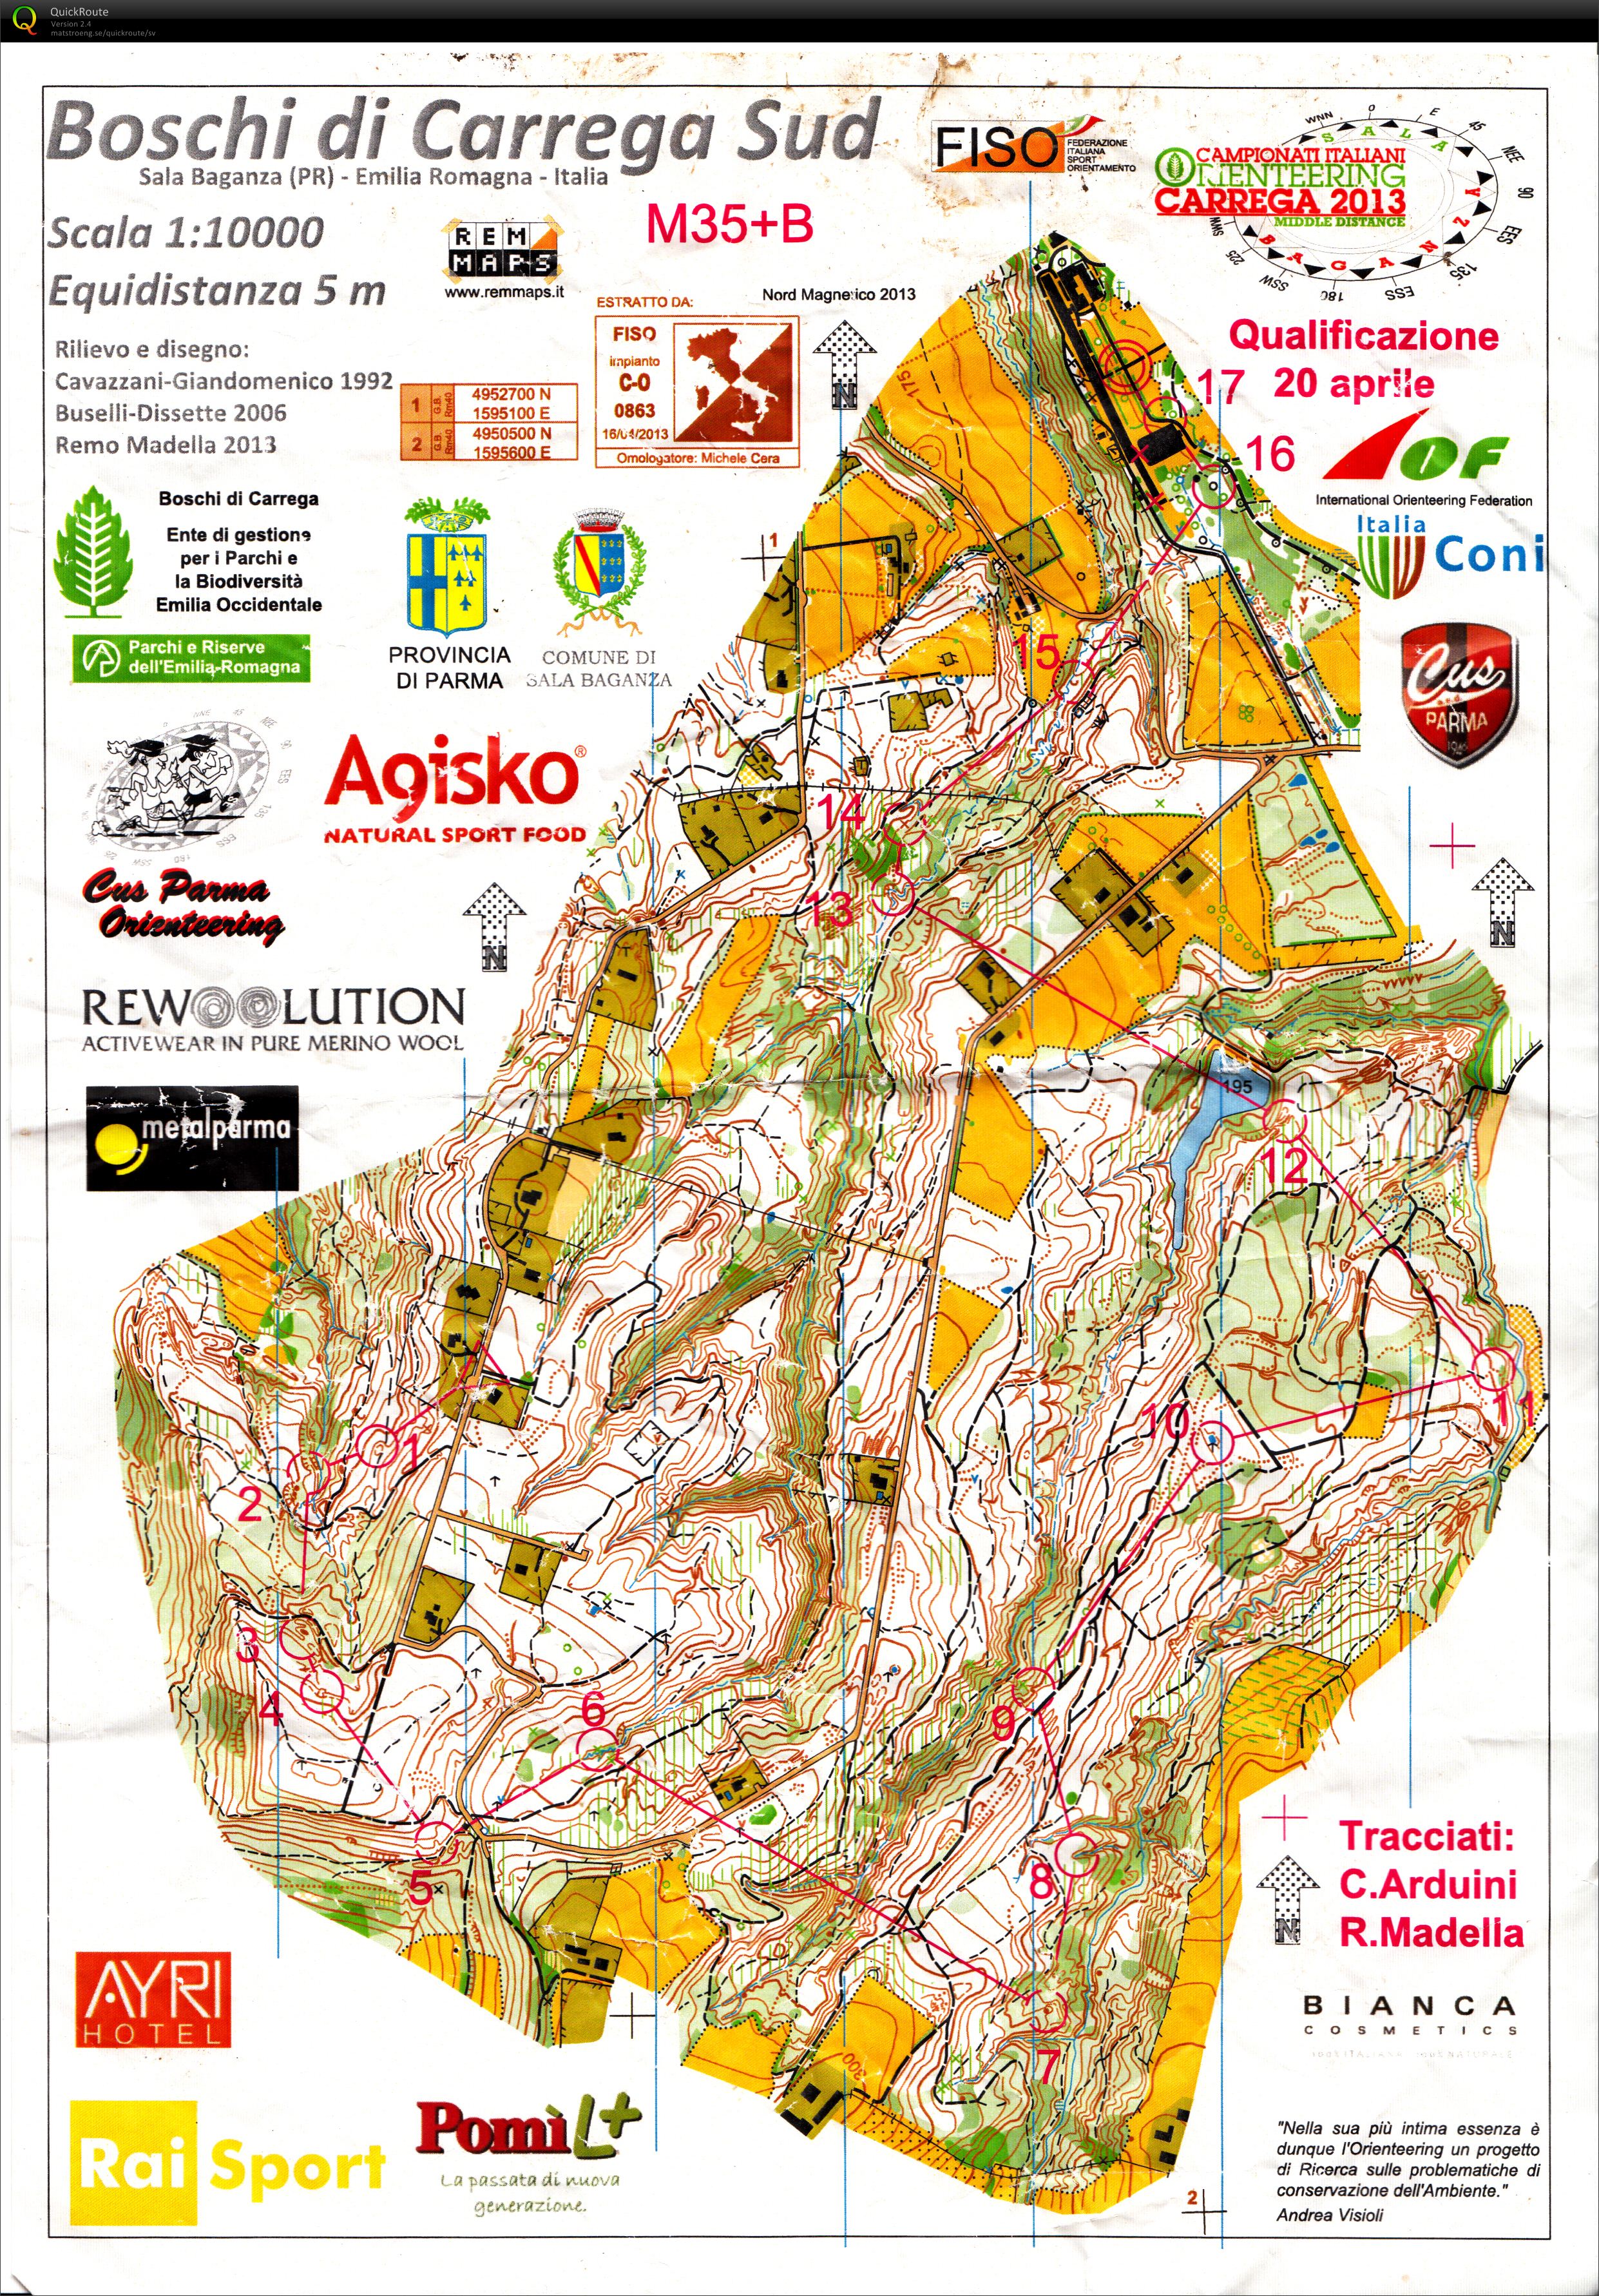 Italian Championship Middle Distance Qualification (2013-04-20)